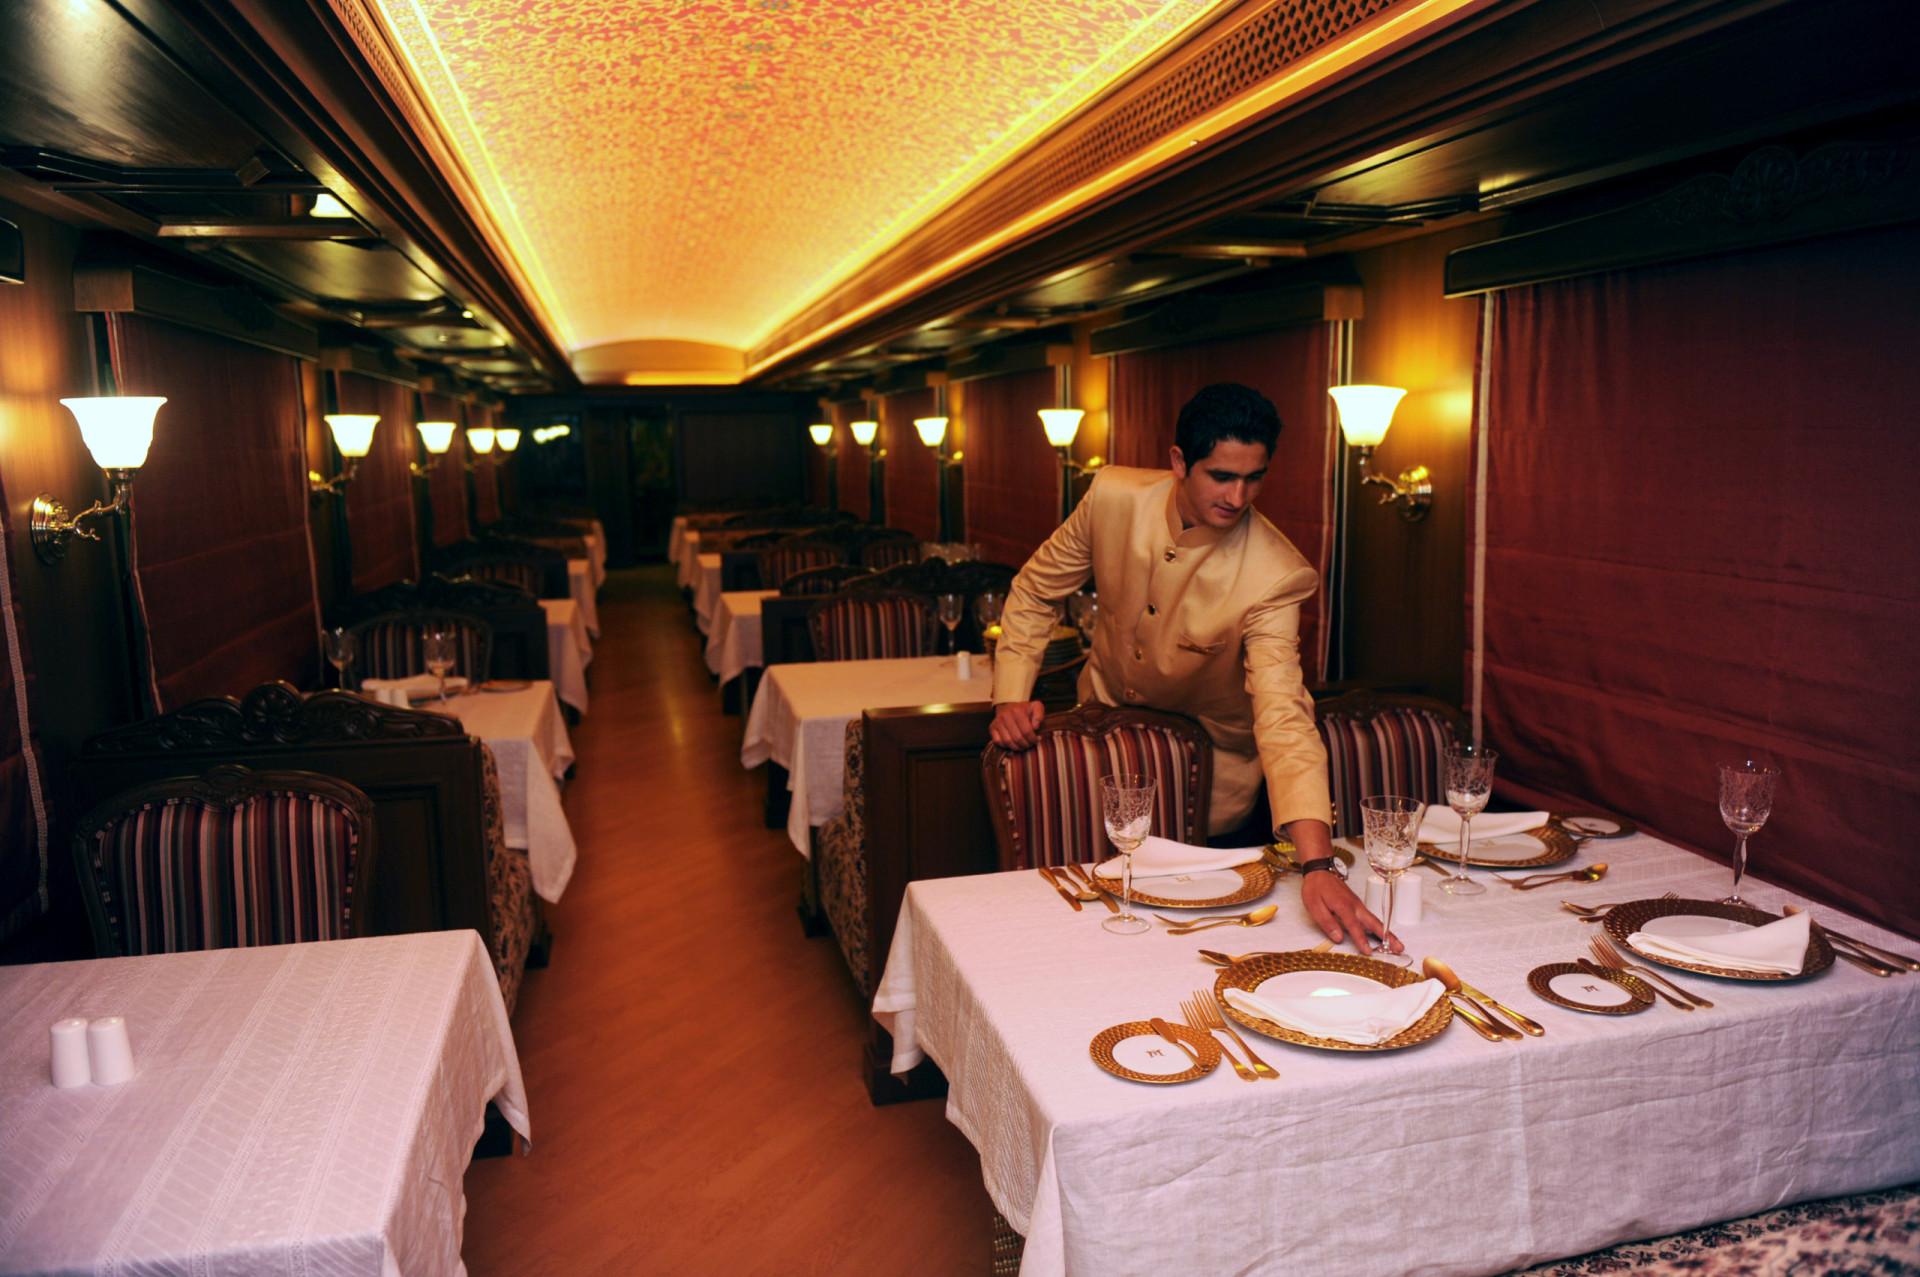 <p>At around US$4,500 per night for the Presidential Suite, India’s Maharaja’s Express is definitely on the right side of the tracks! Taking you to some of India's most emblematic sights, this train has all the amenities needed for a luxurious ride.</p>